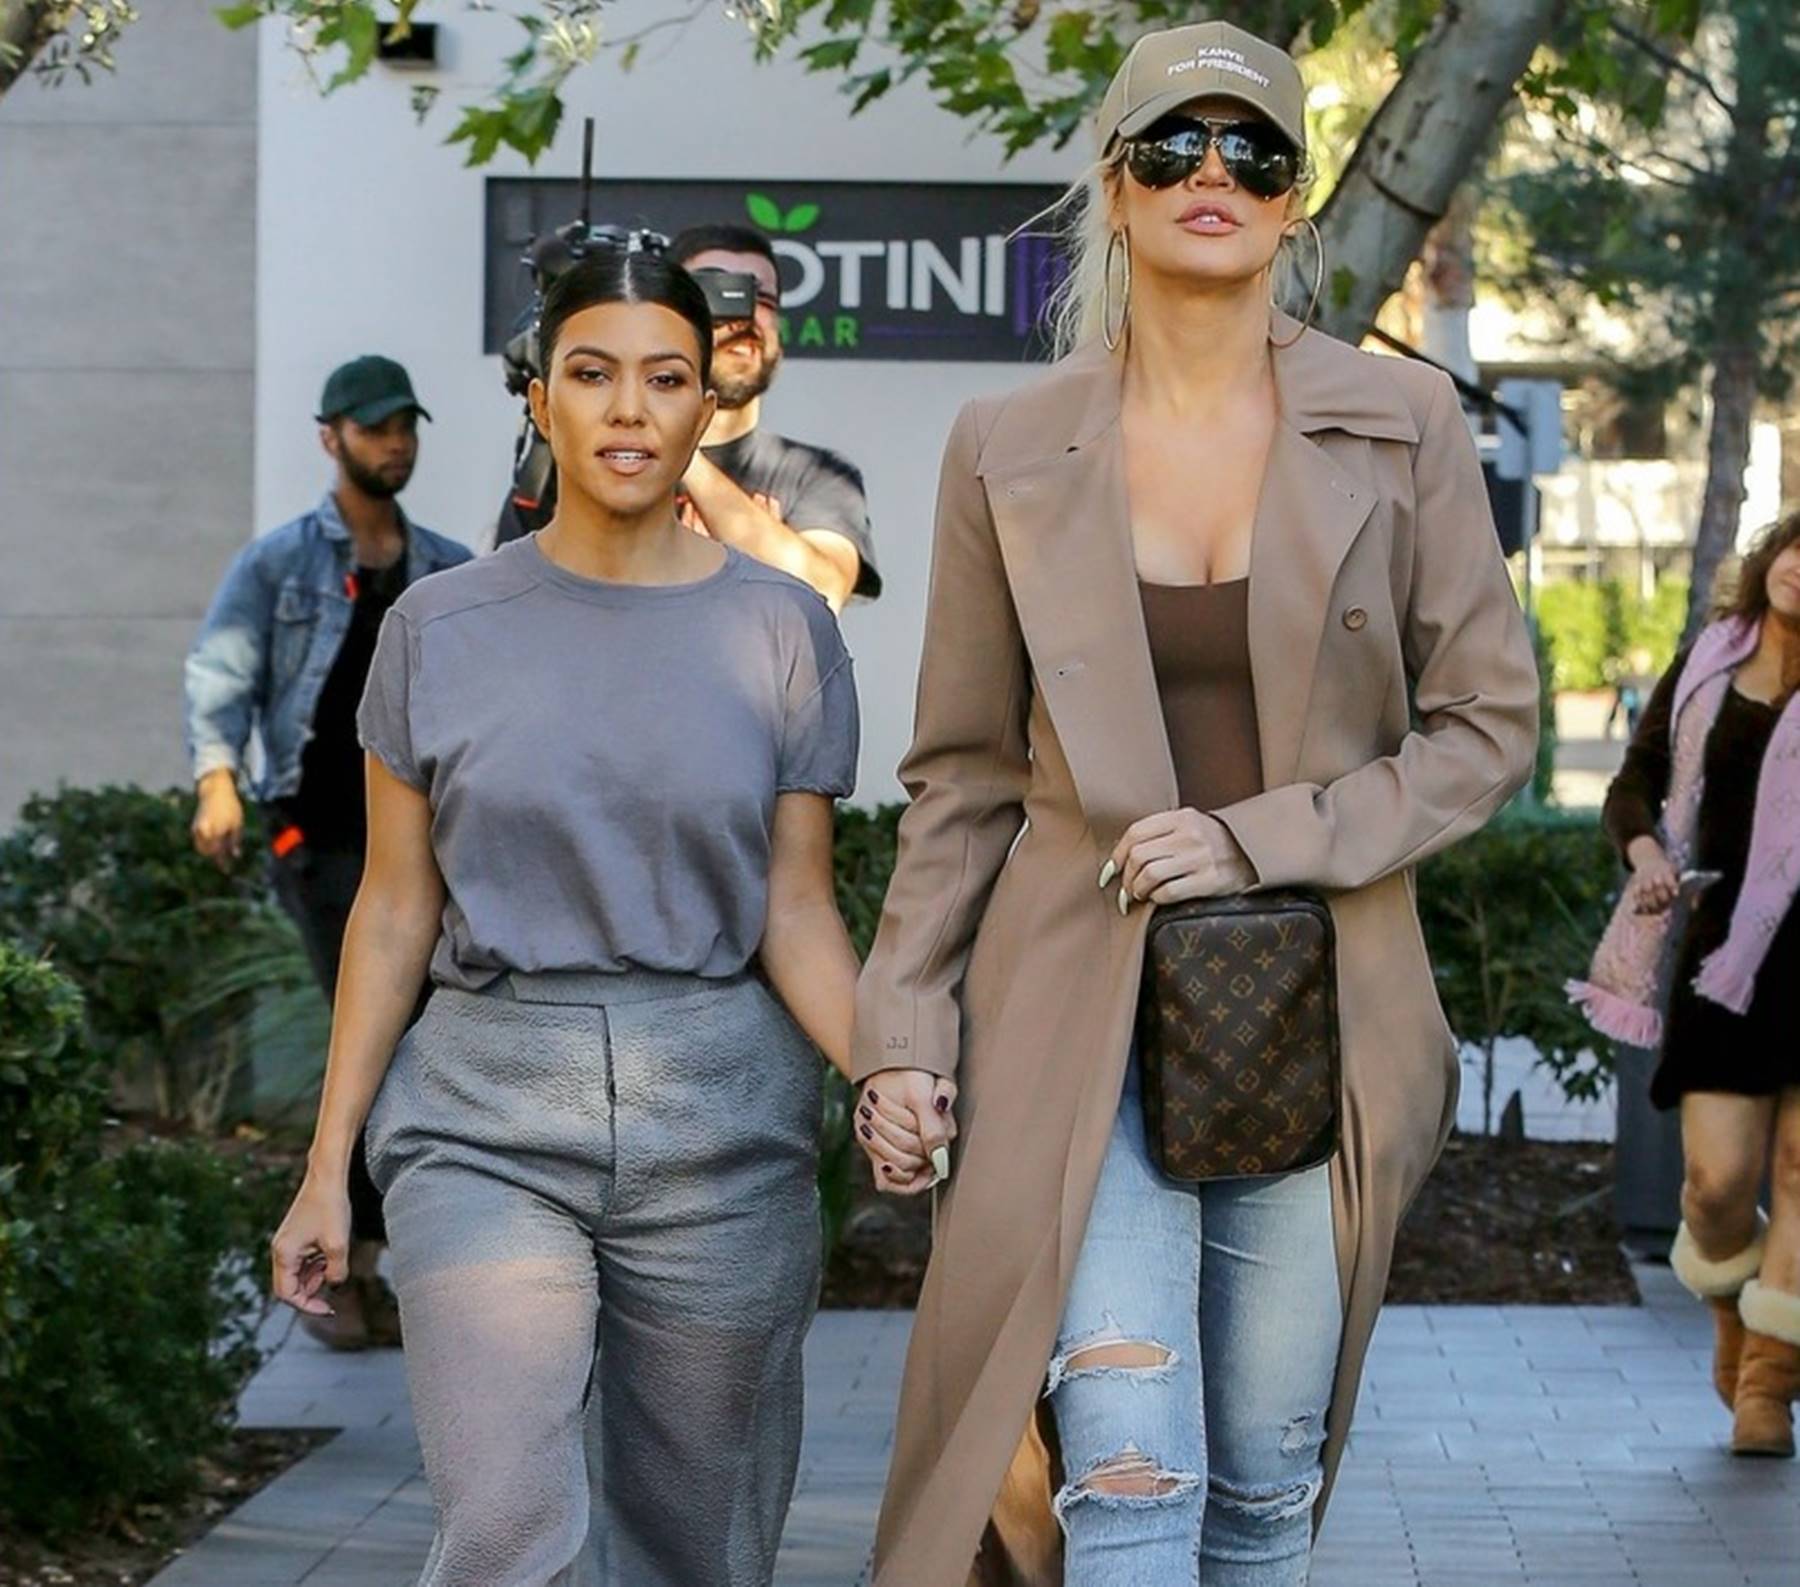 Khloe Kardashian Is Starting To Annoy Her Sisters With All The Tristan Thompson Drama ...